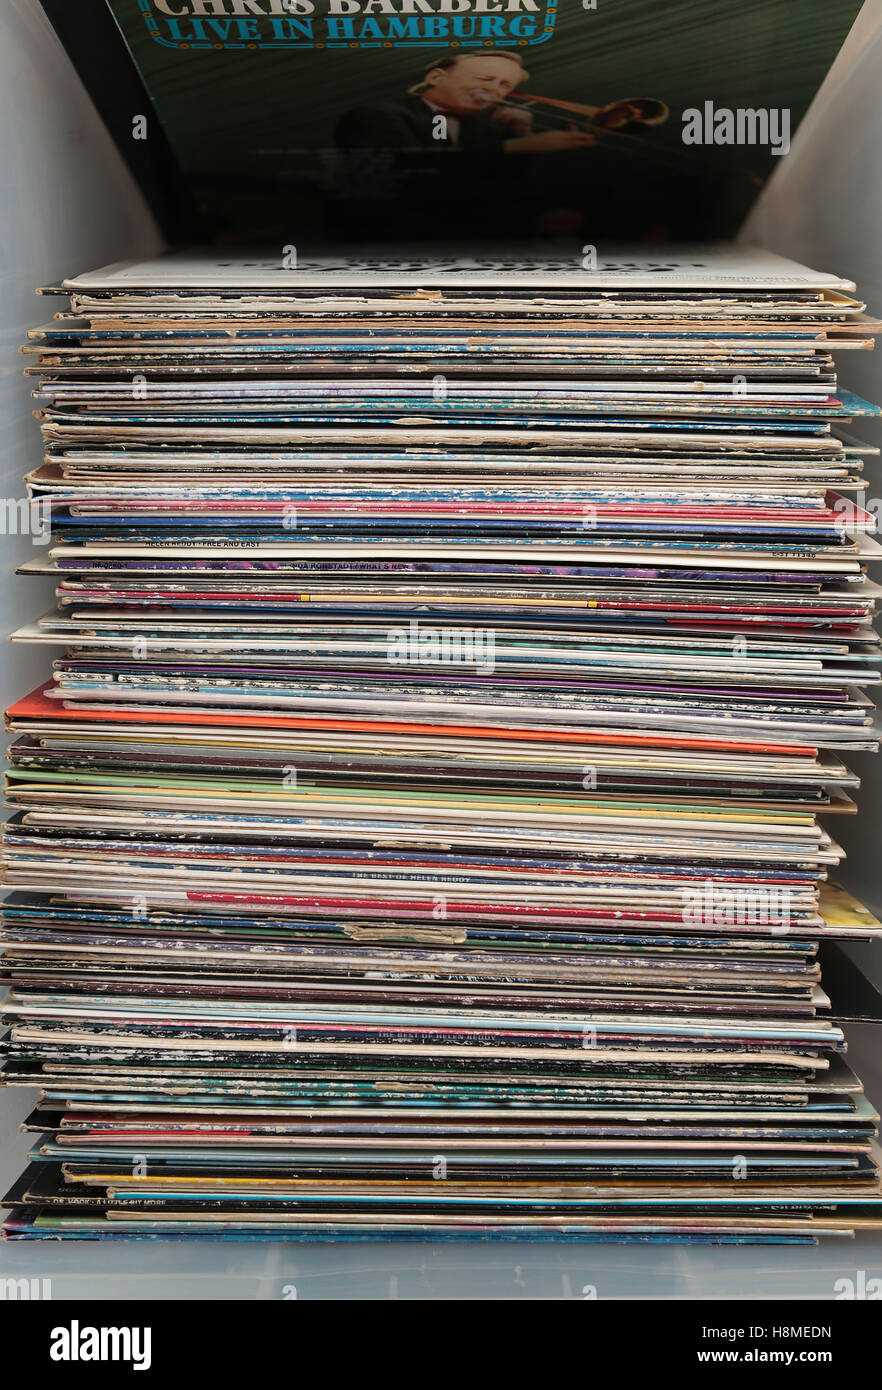 Stack or pile of numerous LP records in a plastic storage box giving a pleasing subtle old fashioned yet fashionable on trend concept Stock Photo